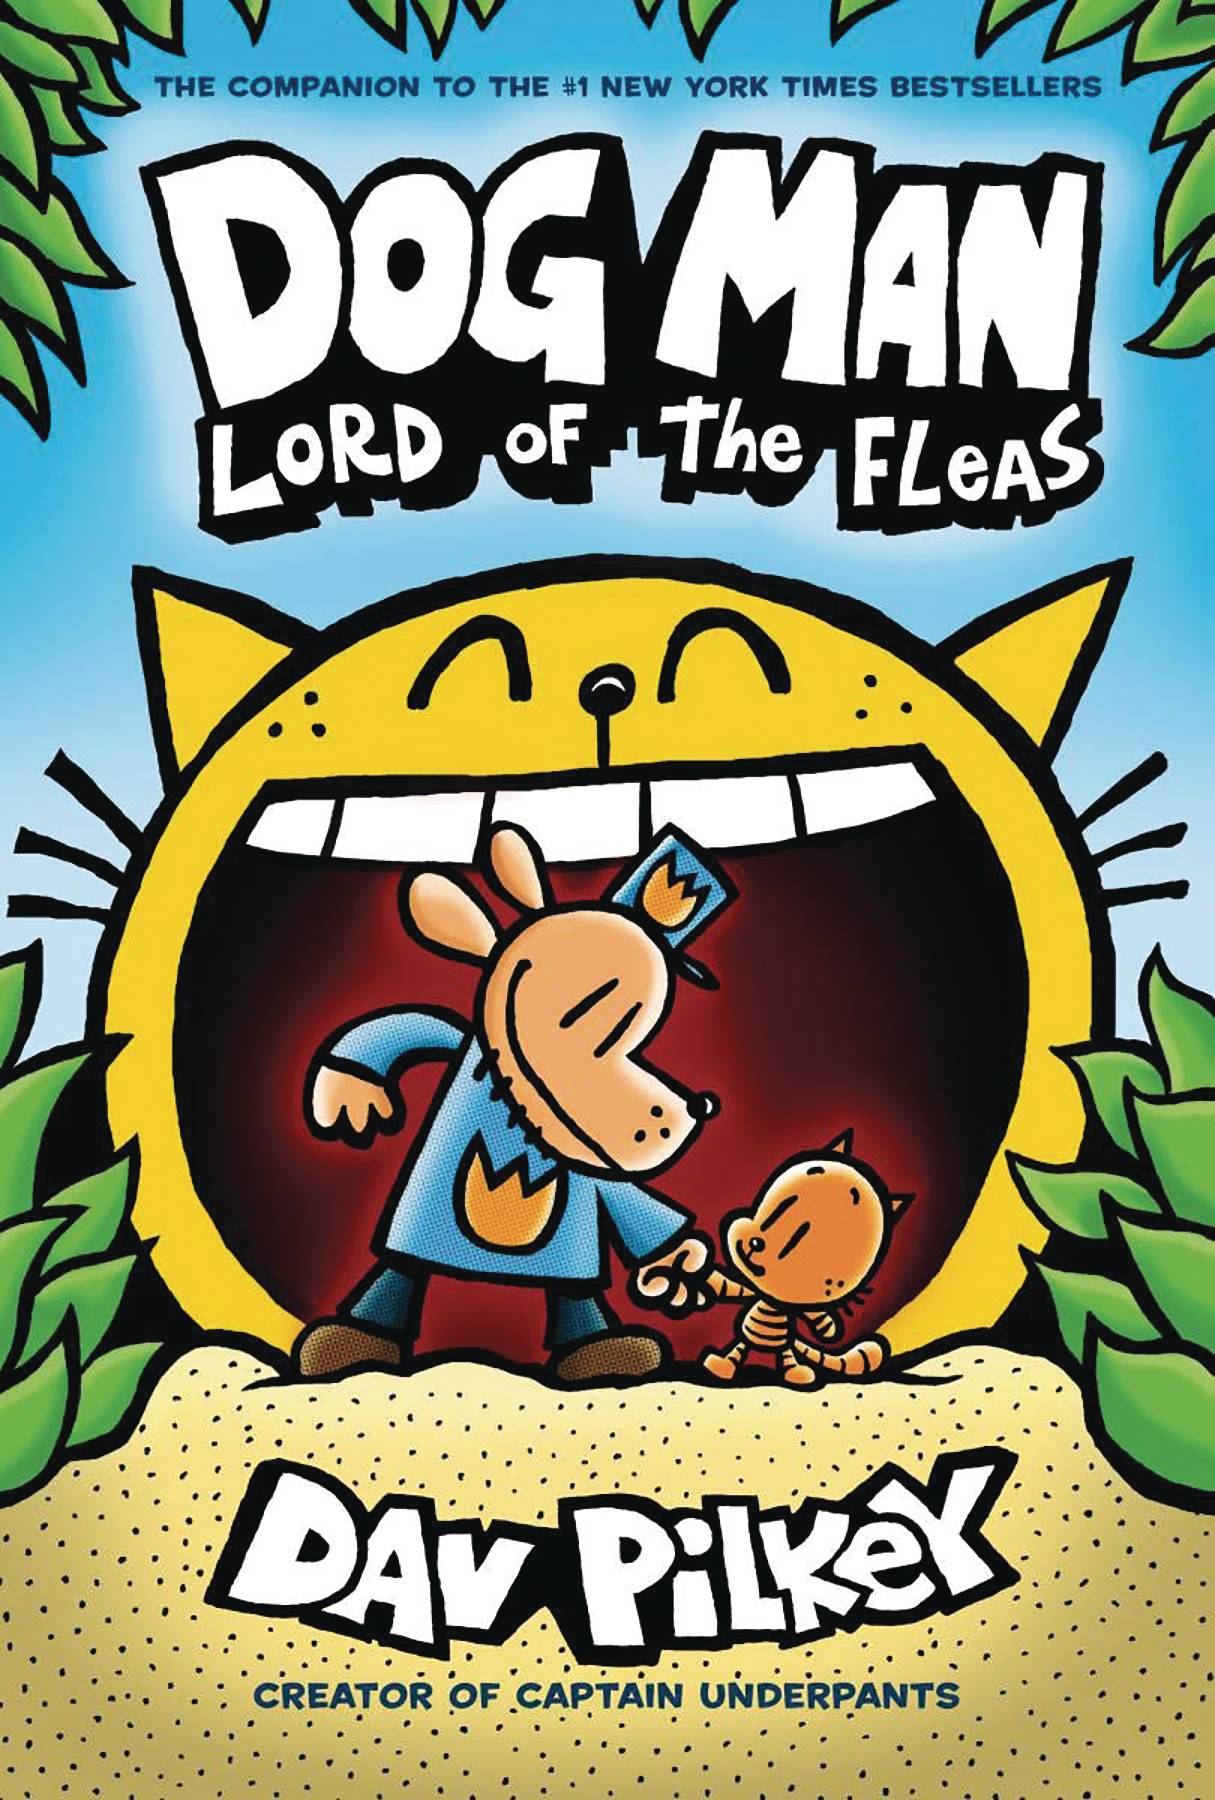 Dog Man Hardcover Graphic Novel With Dust Jacket Volume 5 Lord of Fleas